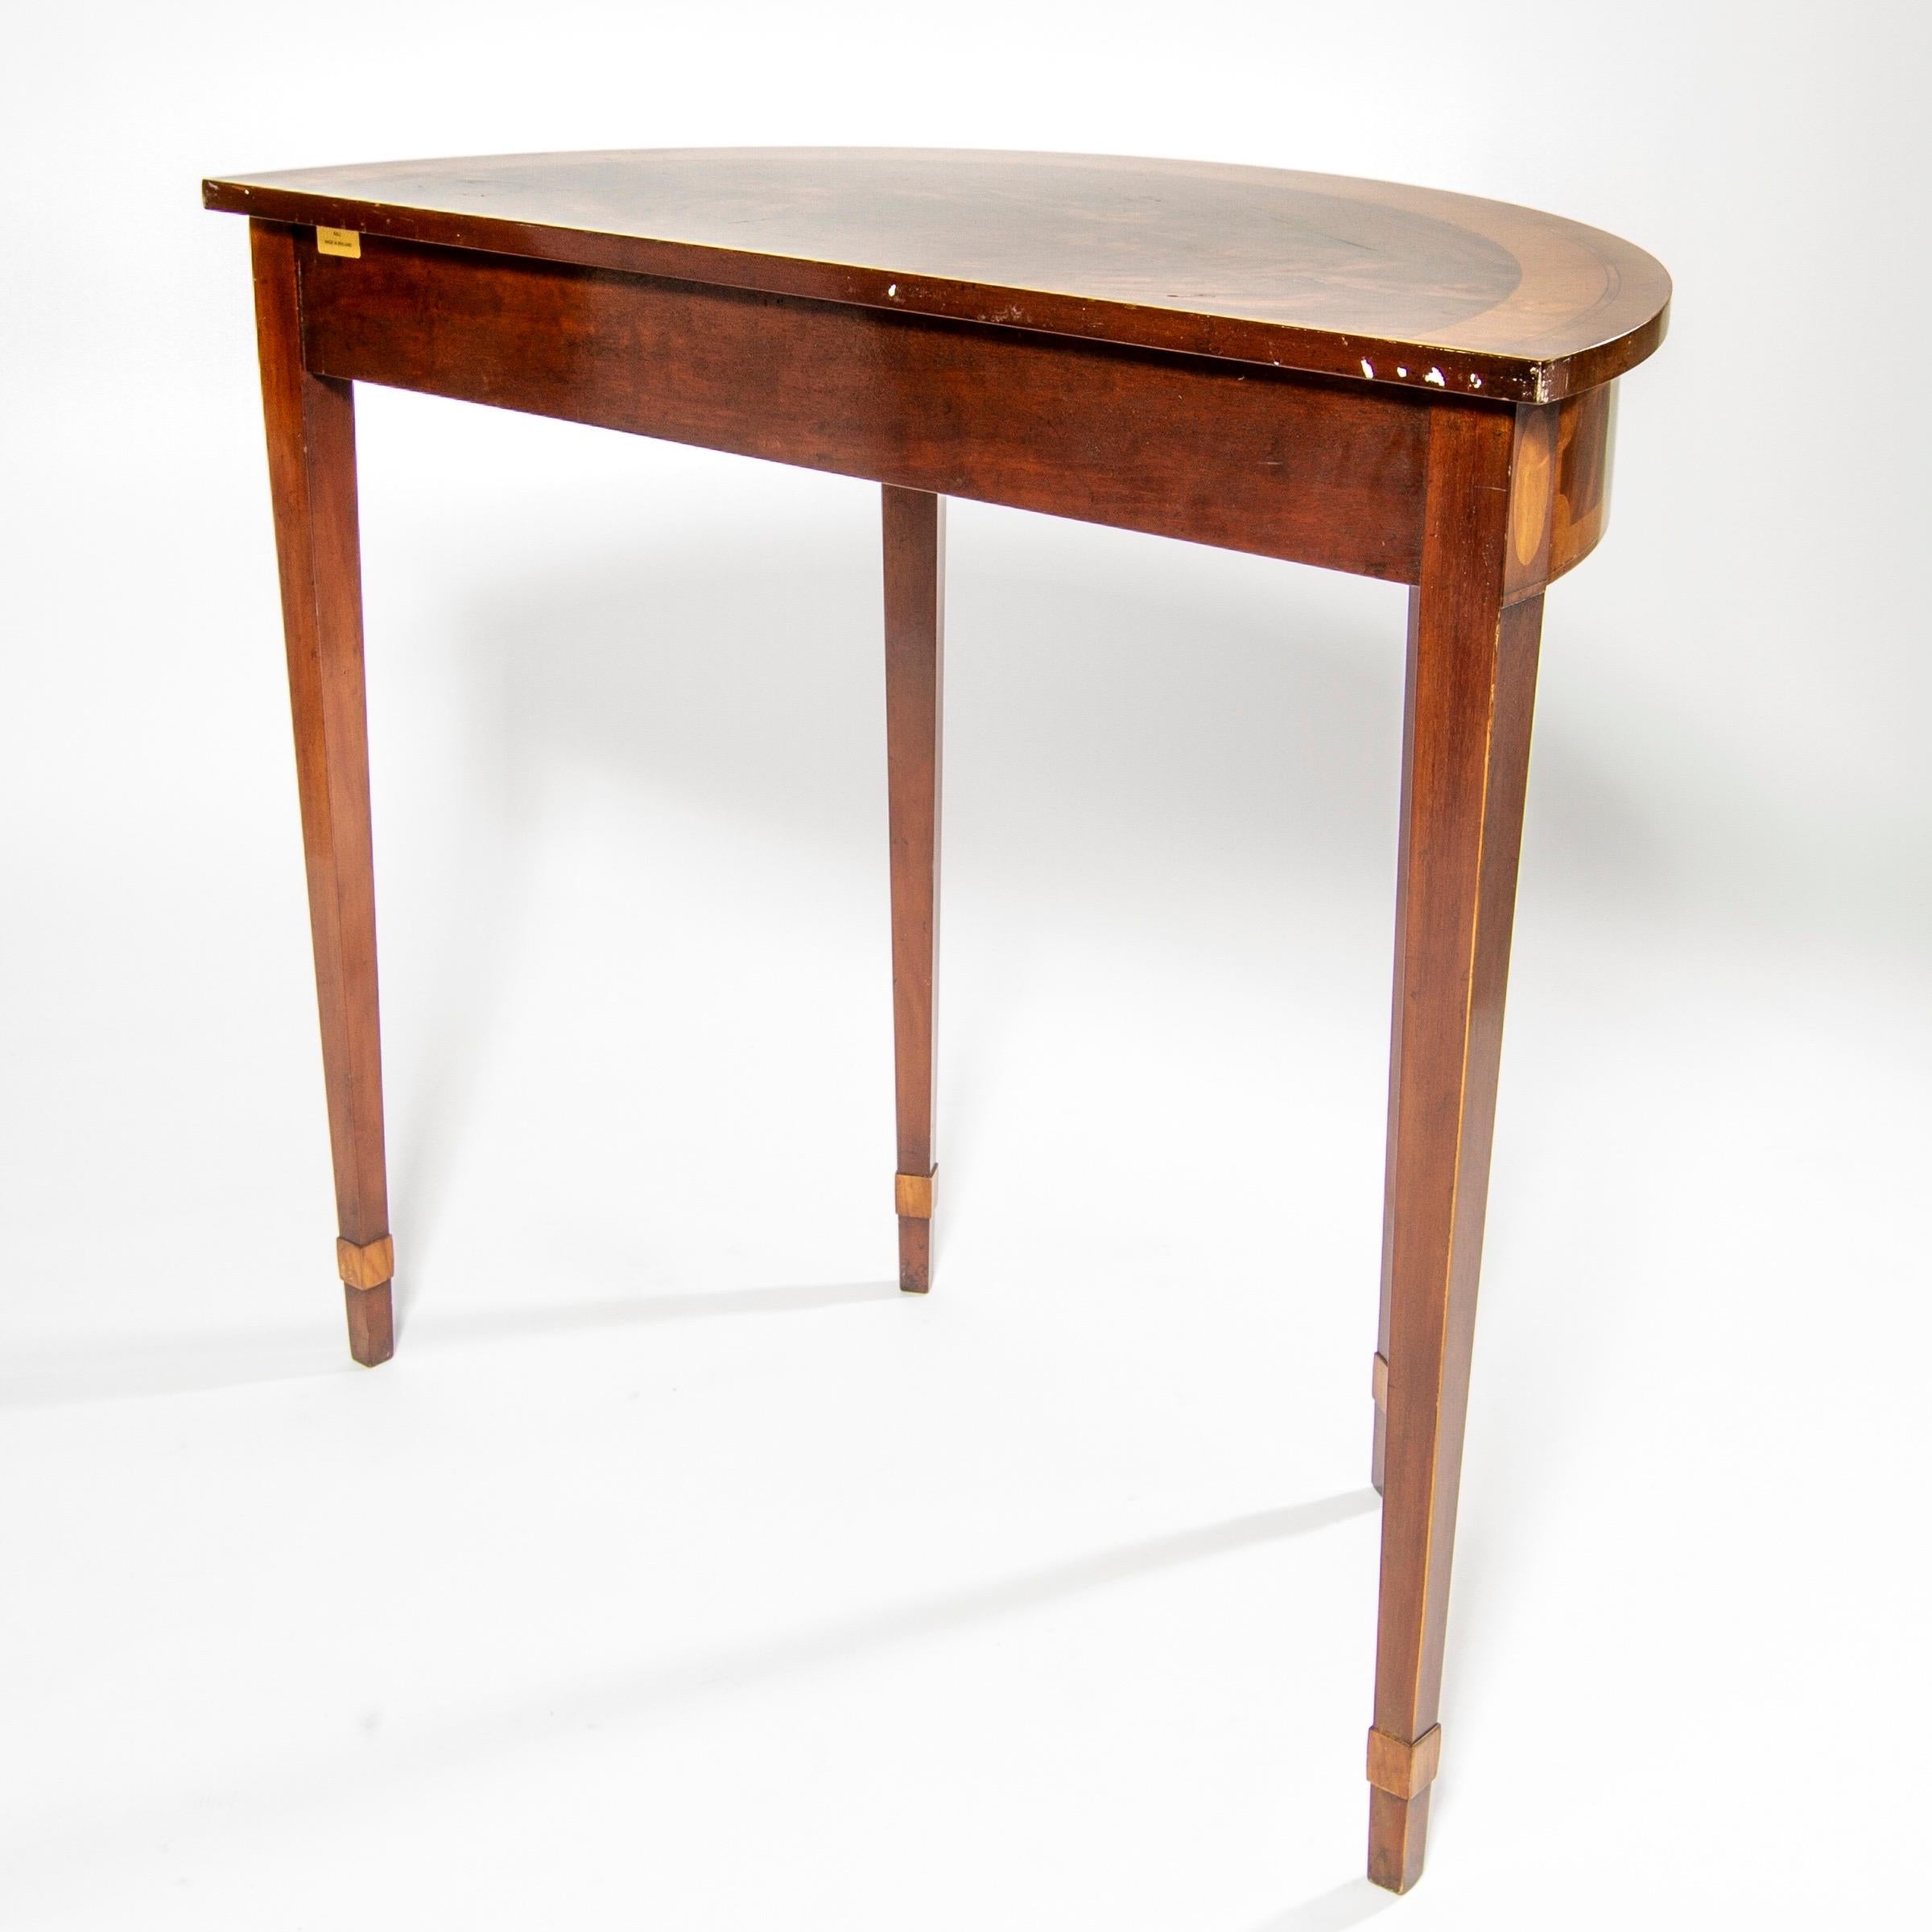 20th Century Neoclassical Directoire Mahogany Inlay Demilune Console Table, RBC In Good Condition For Sale In Miami, FL